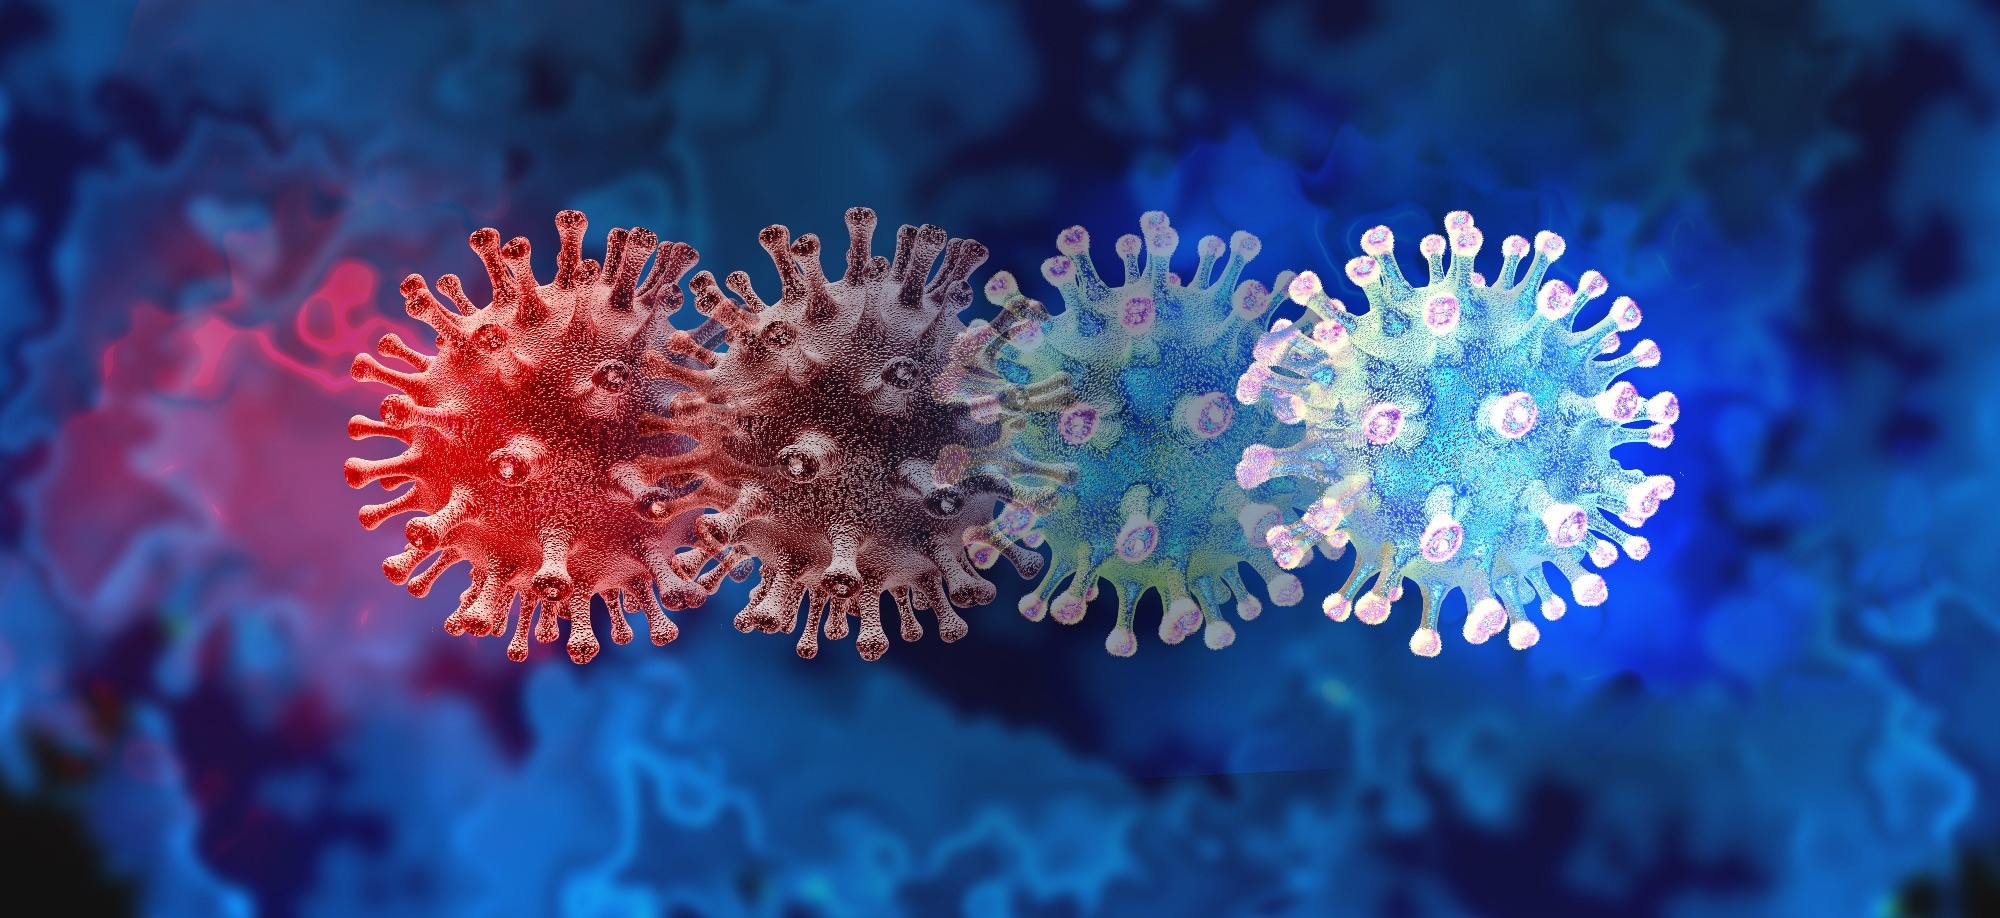 Study: Comparison Of New and emerging SARS-CoV-2 variant Transmissibility through Active Contact Testing. A comparative cross-sectional household seroprevalence study. Image Credit: Lightspring/Shutterstock